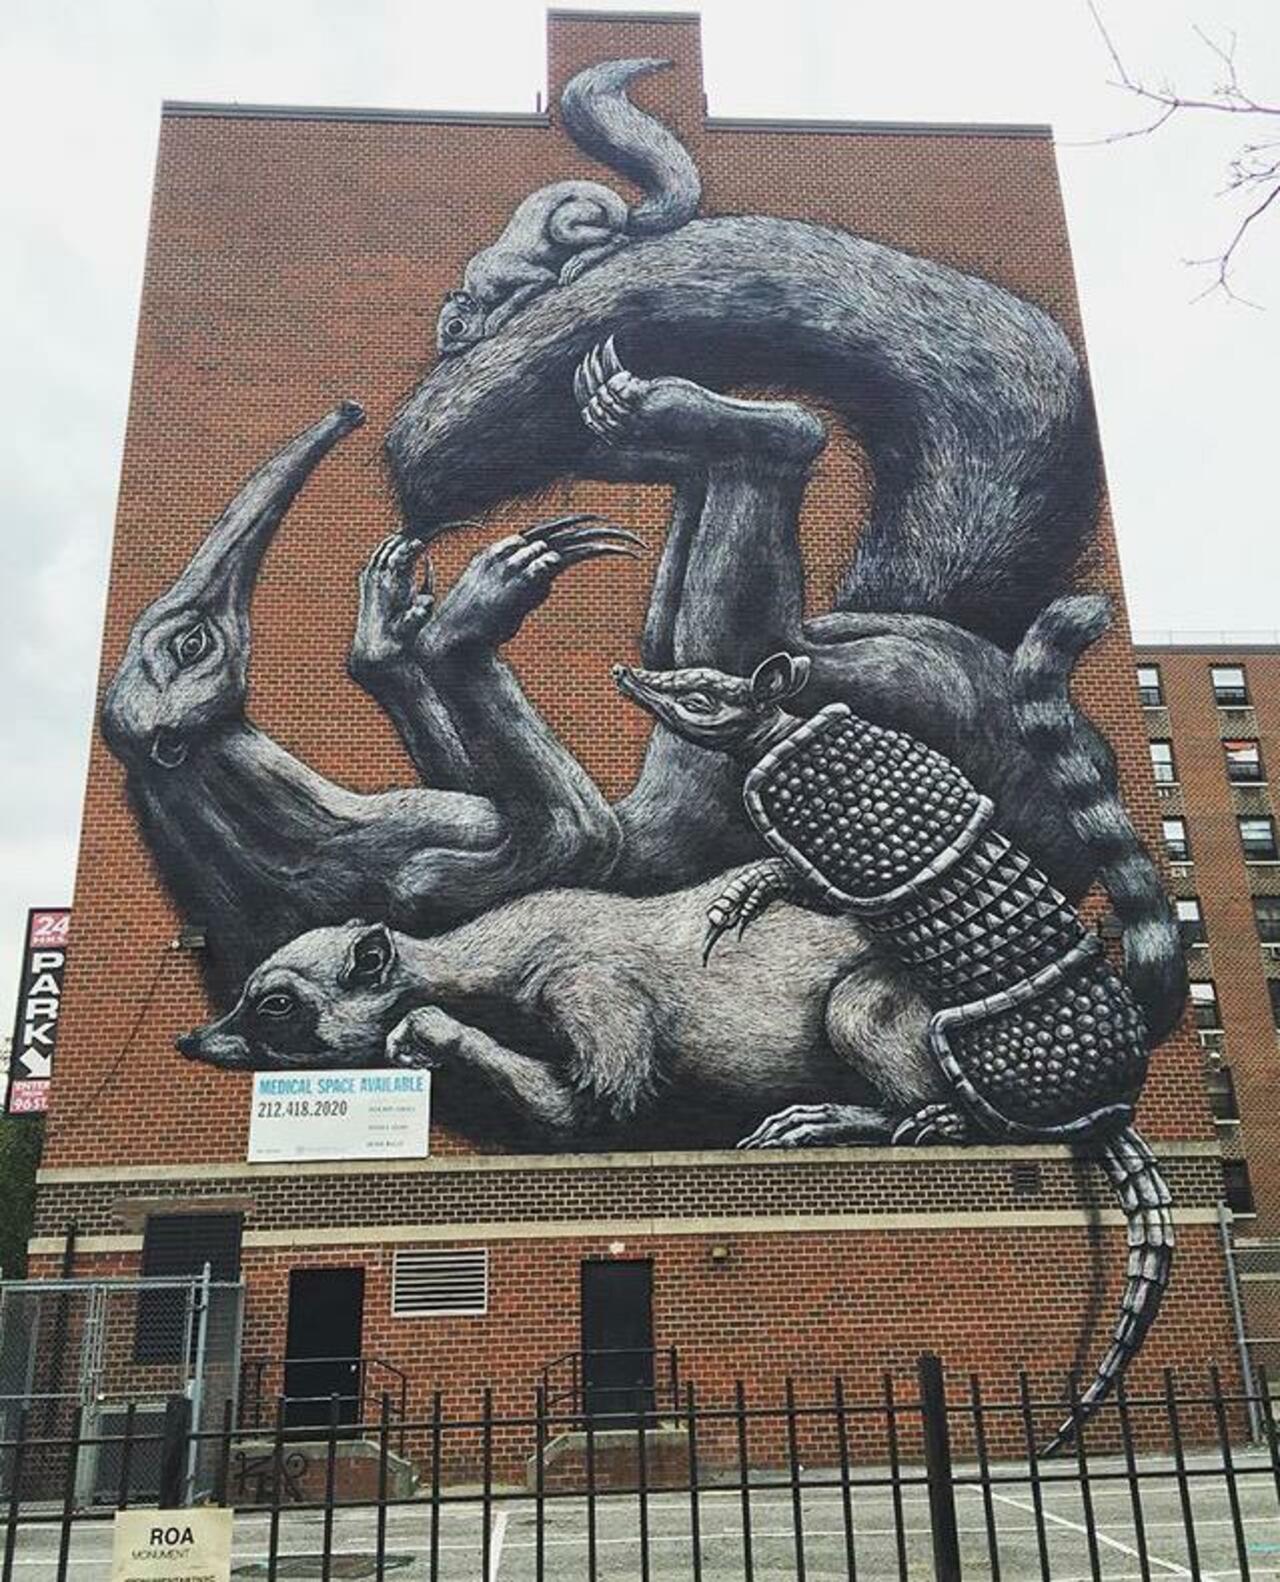 The completed new large scale Street Art wall by ROA in NYC

#art #graffiti #mural #streetart http://t.co/ai76gbFYN9